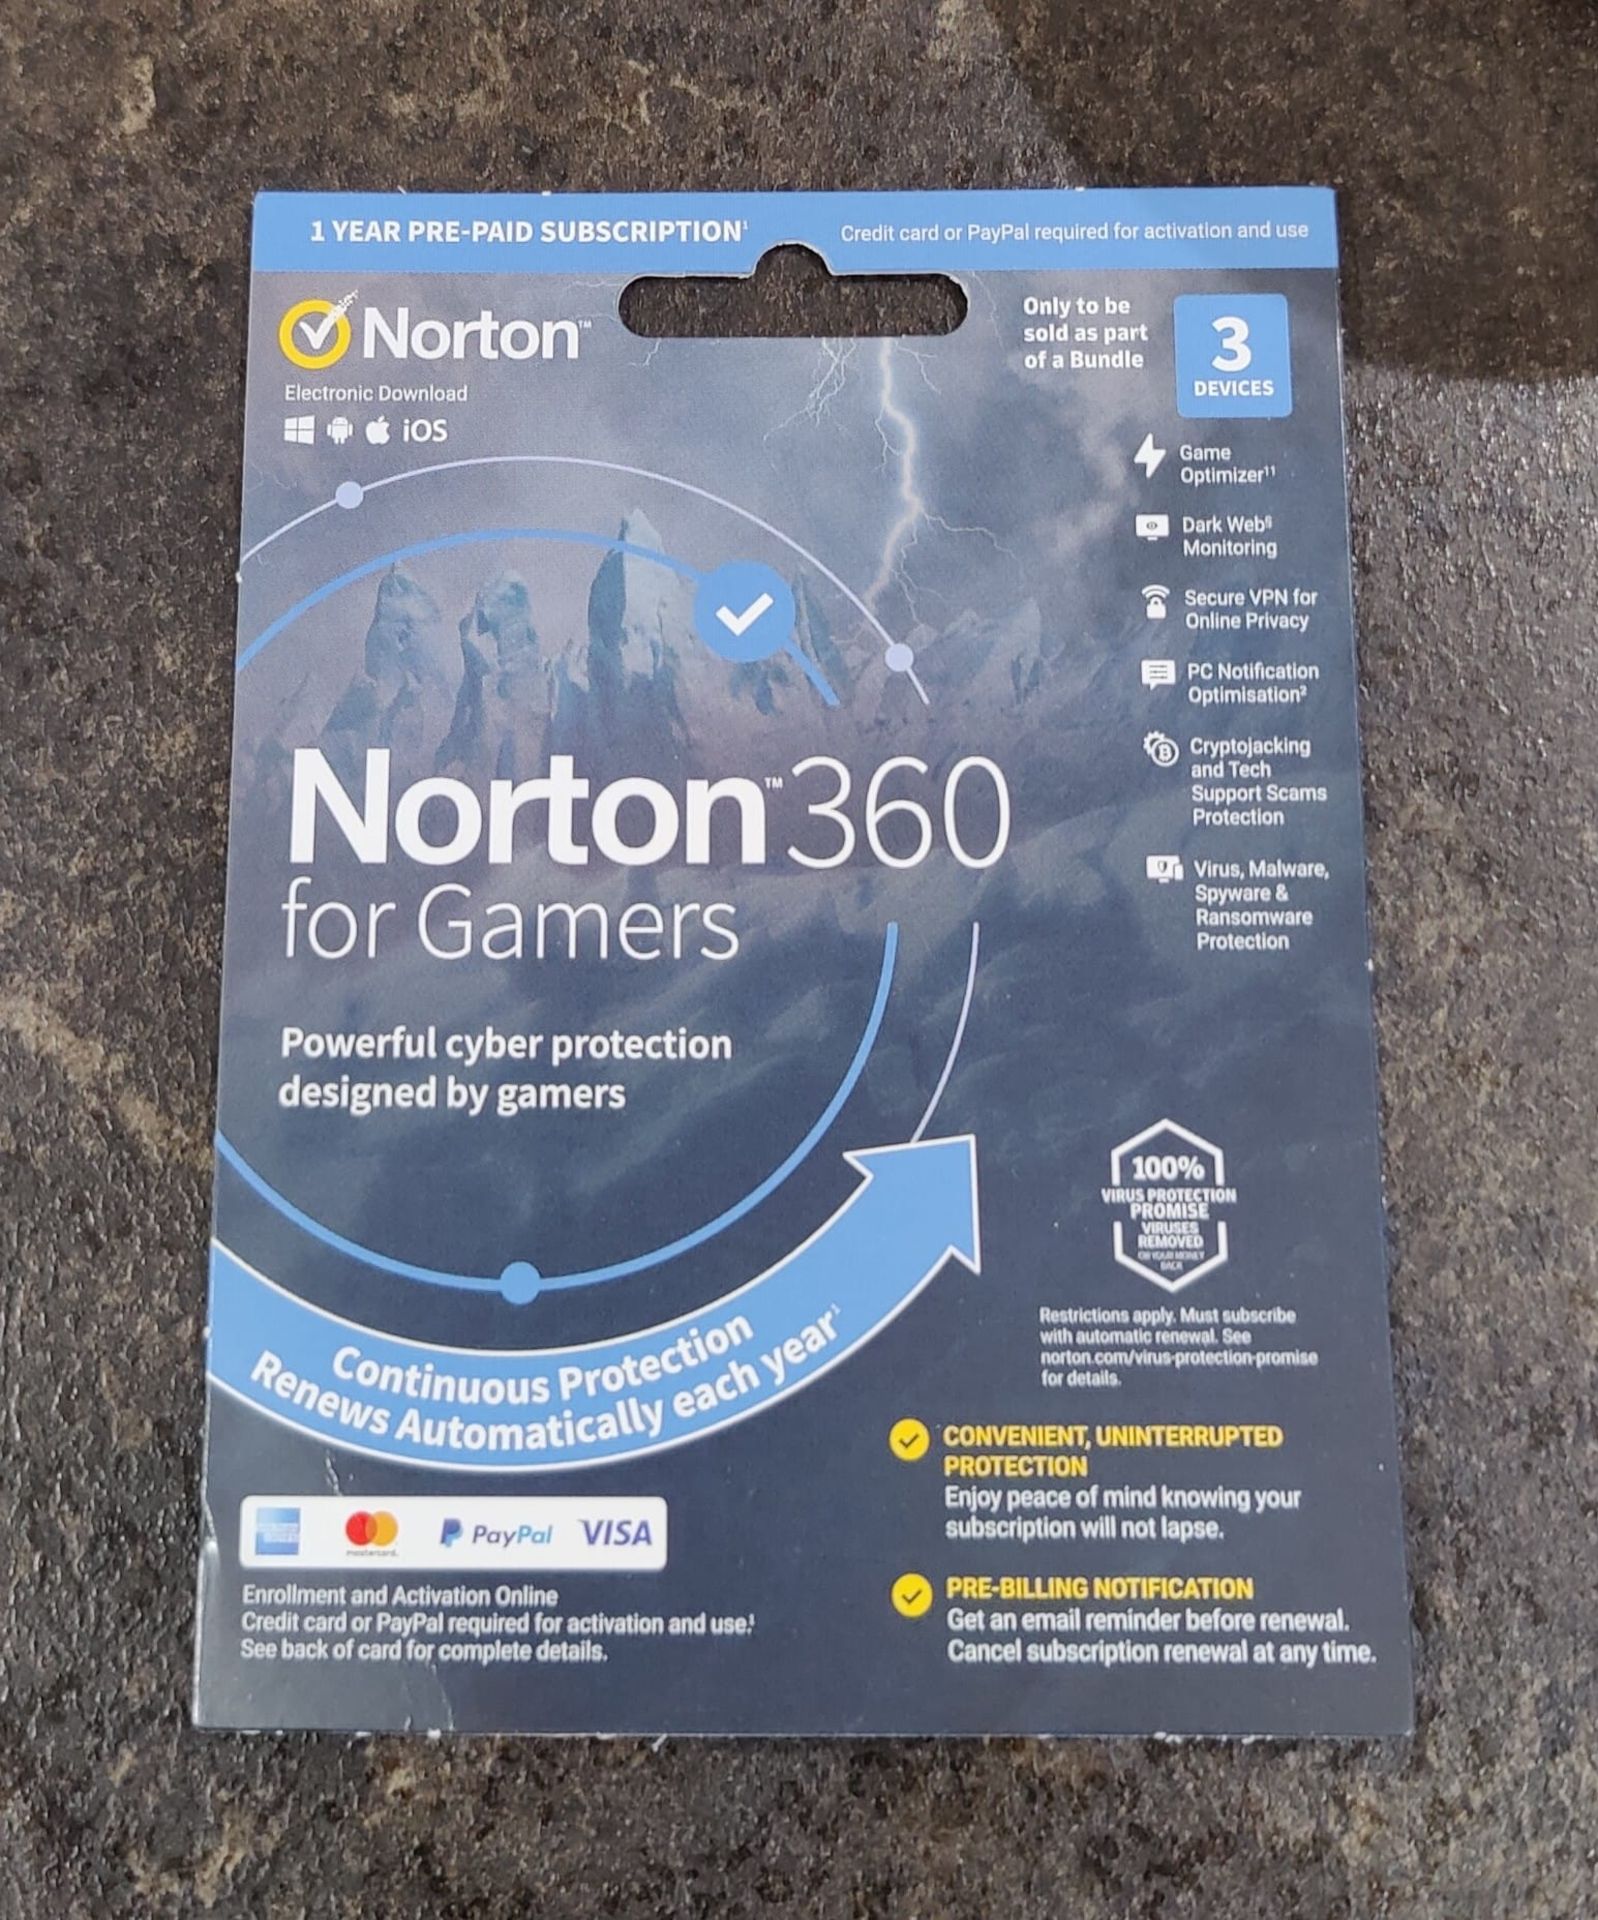 1 x Norton 360 Anti Virus For Gamers - 1 Years Subscription (3 Devices) - New and Unused - CL010 -